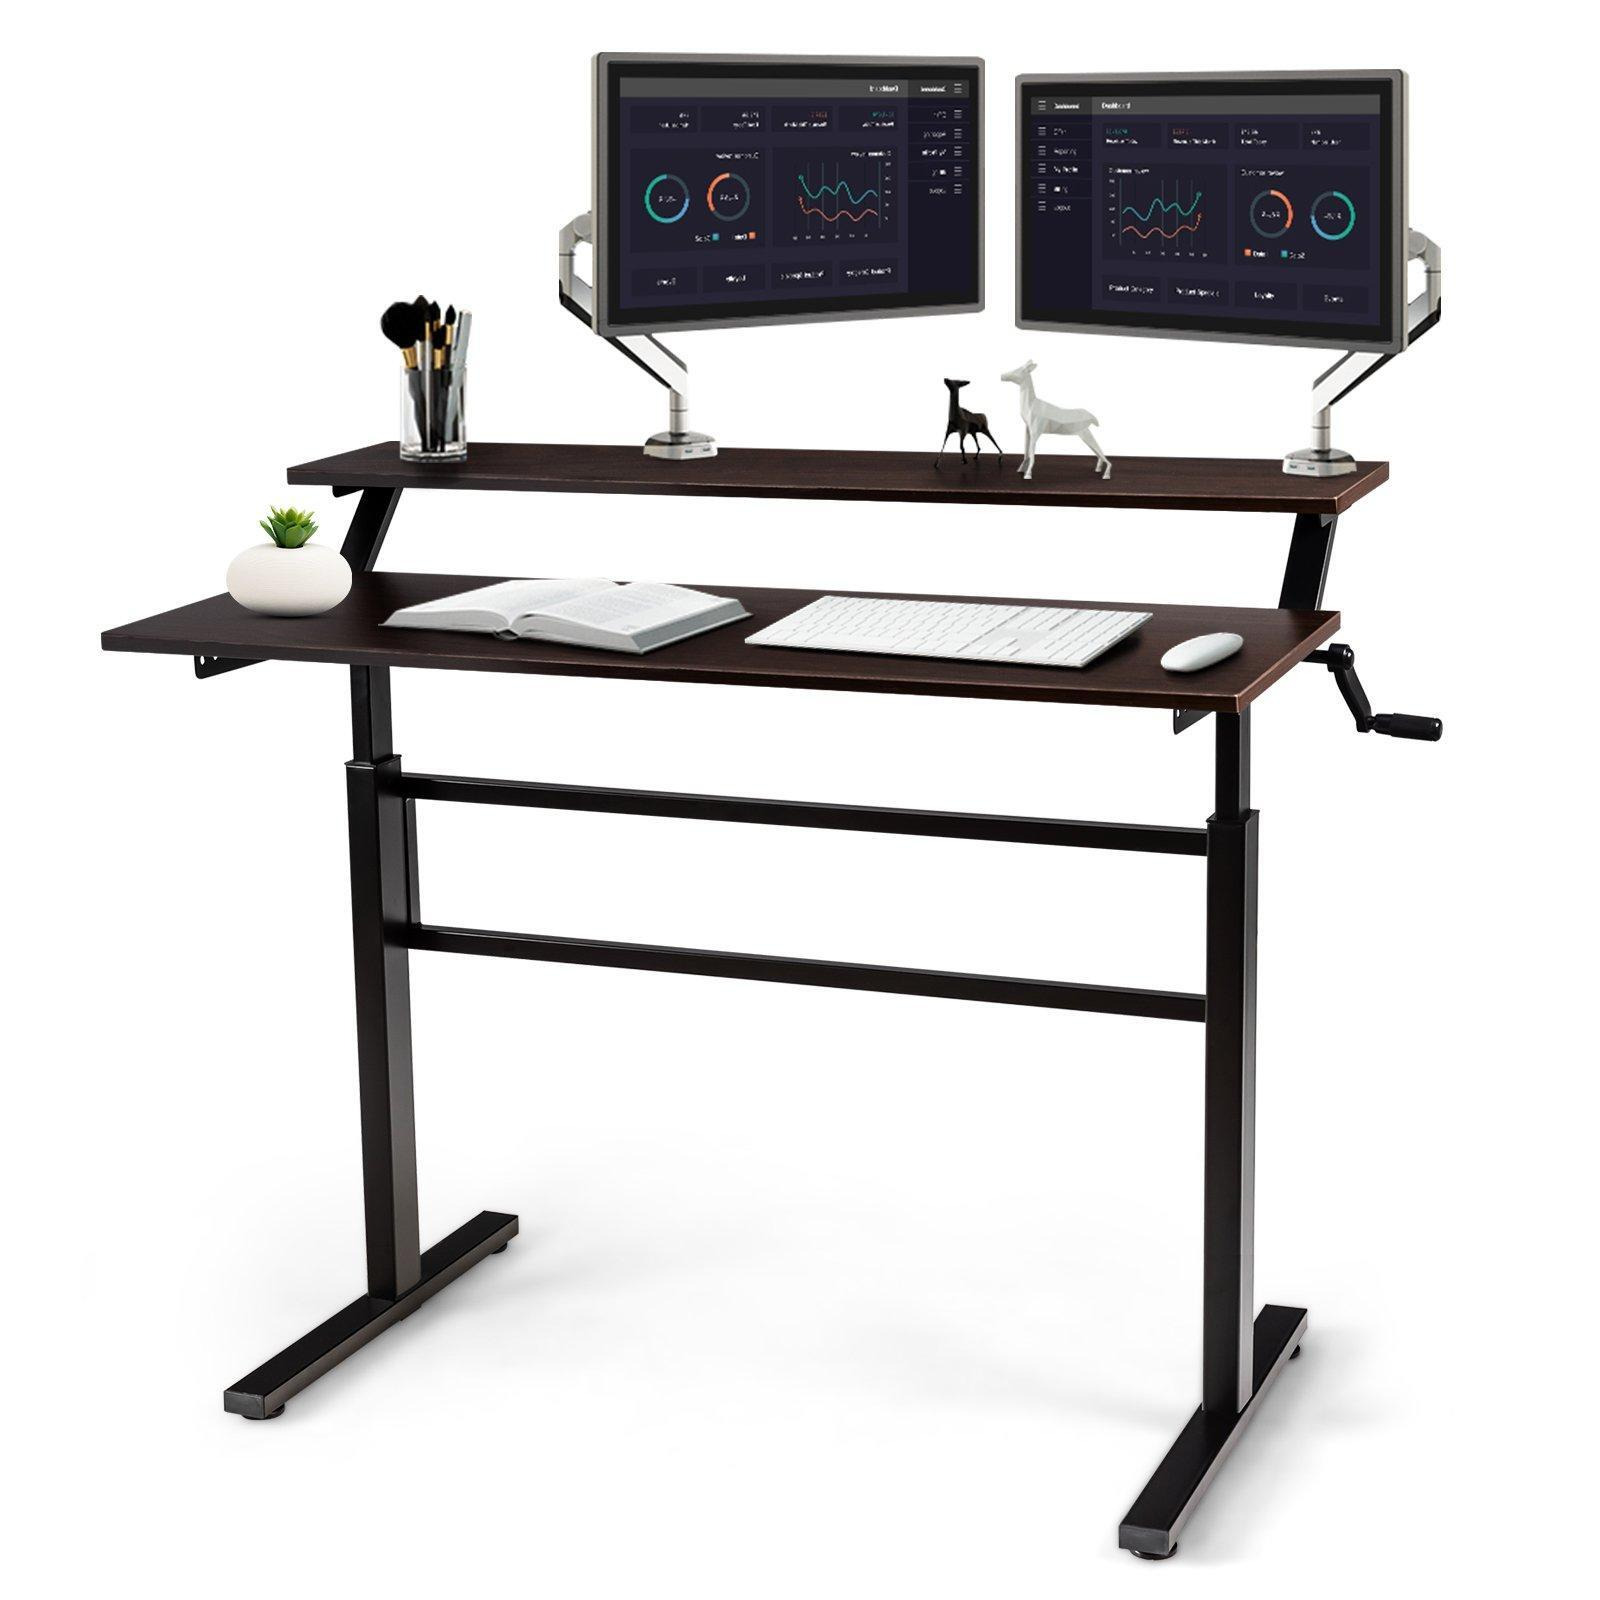 2-Tier Standing Computer Desk Sit to Stand Workstation Ergonomic Computer Table - image 1